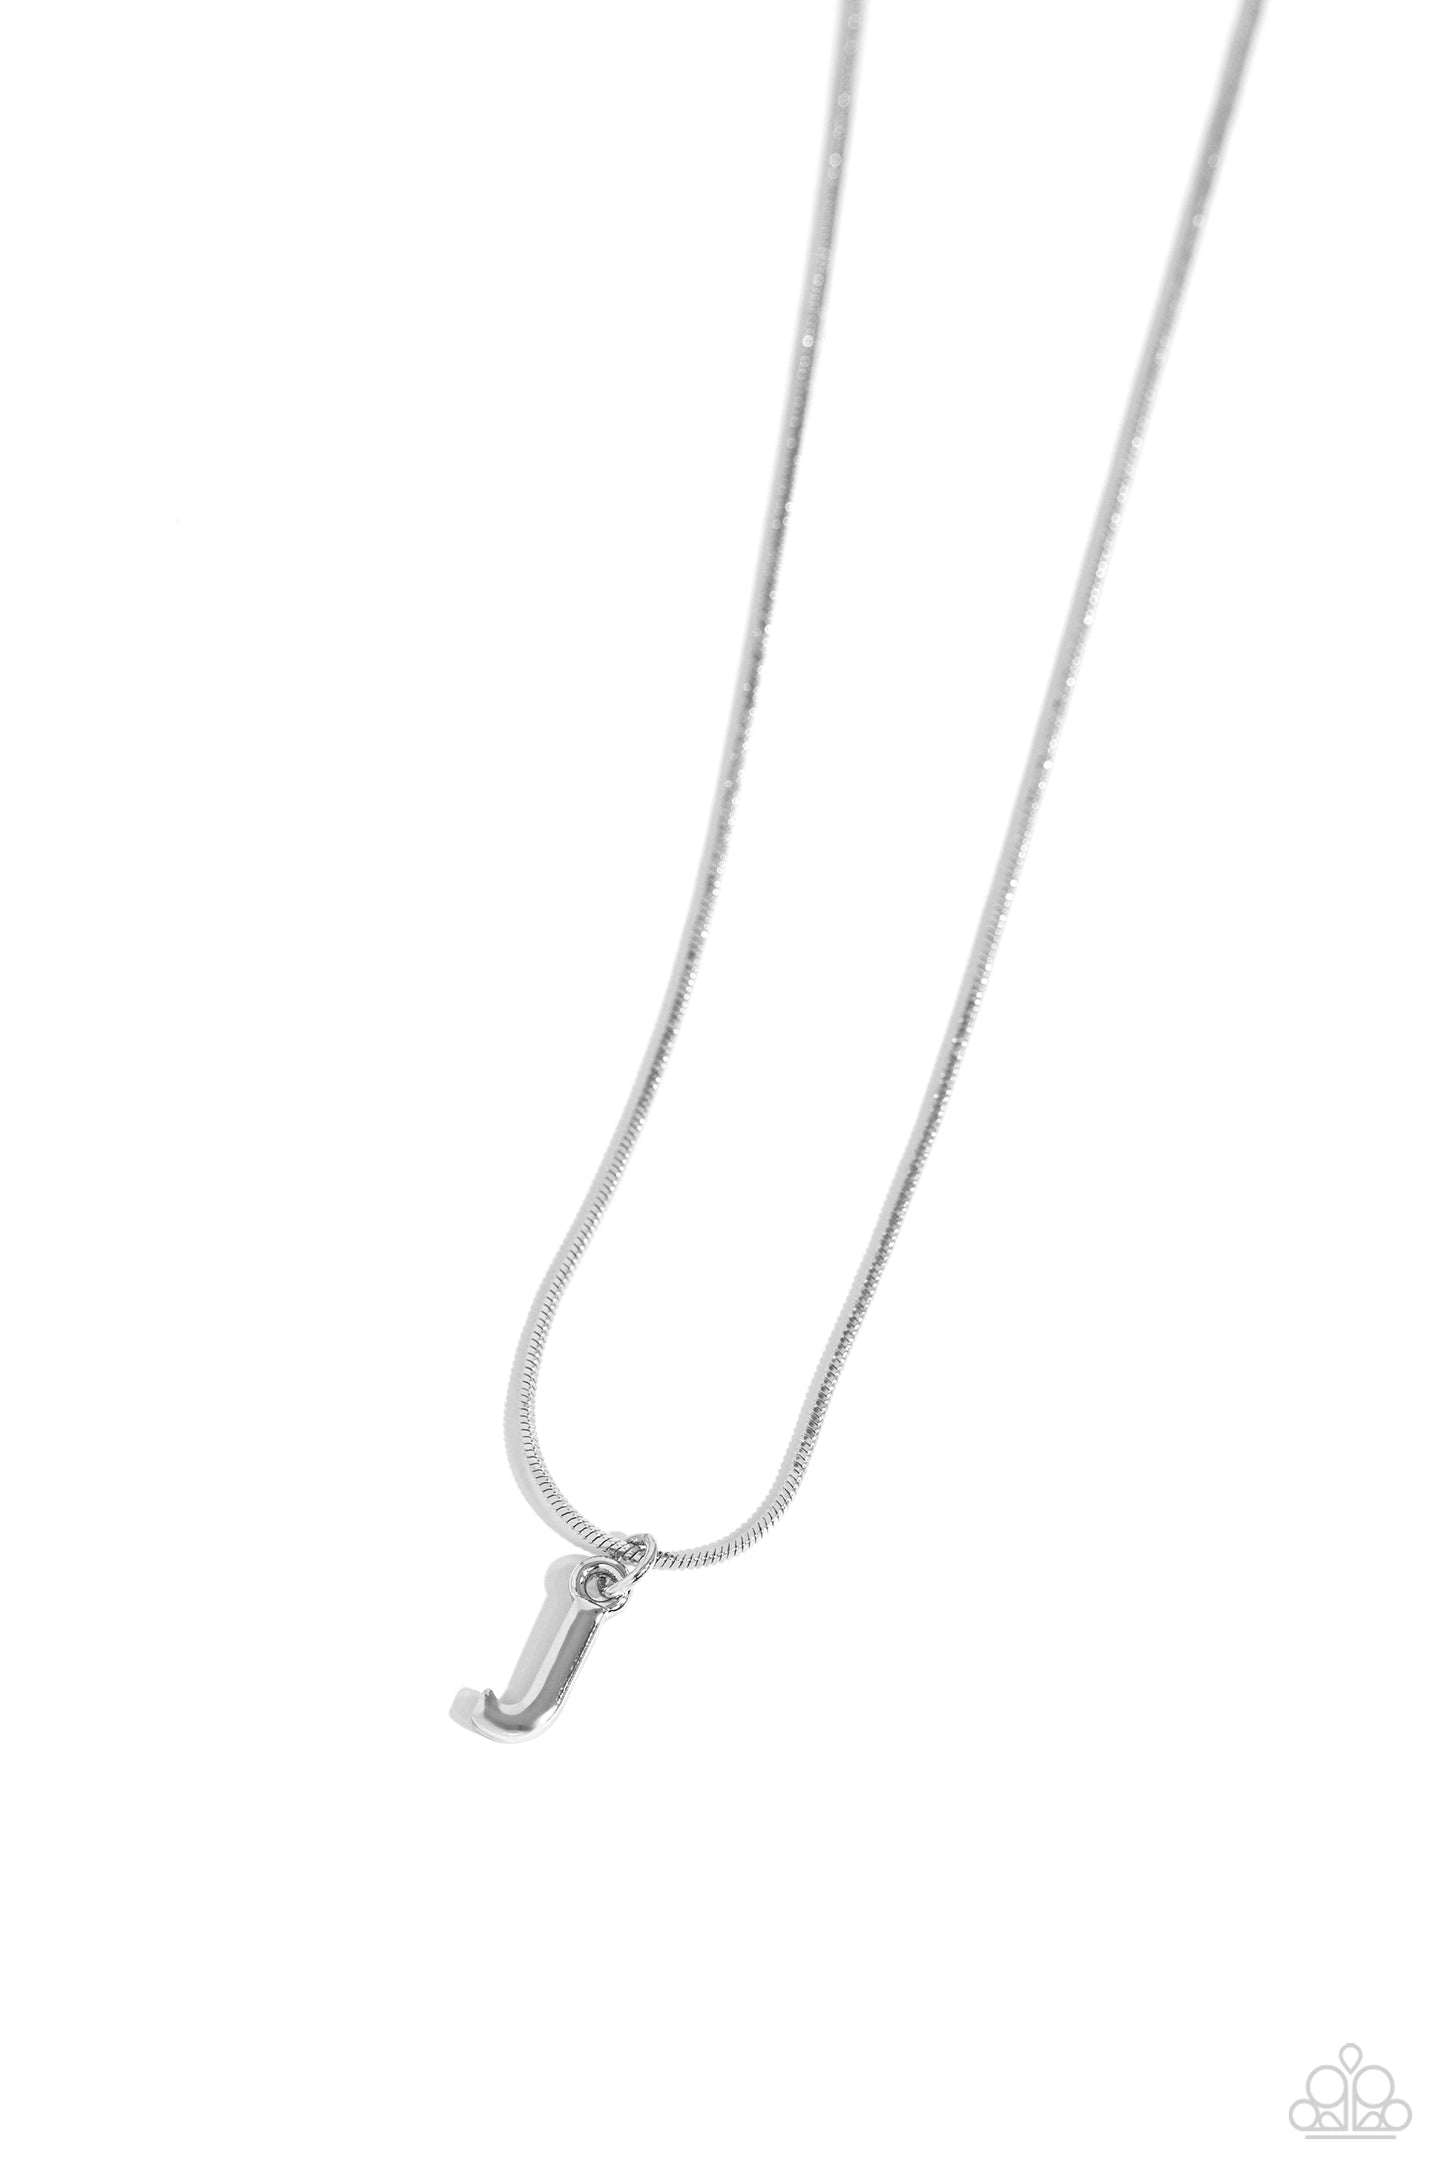 Seize the Initial - silver - J - Paparazzi necklace